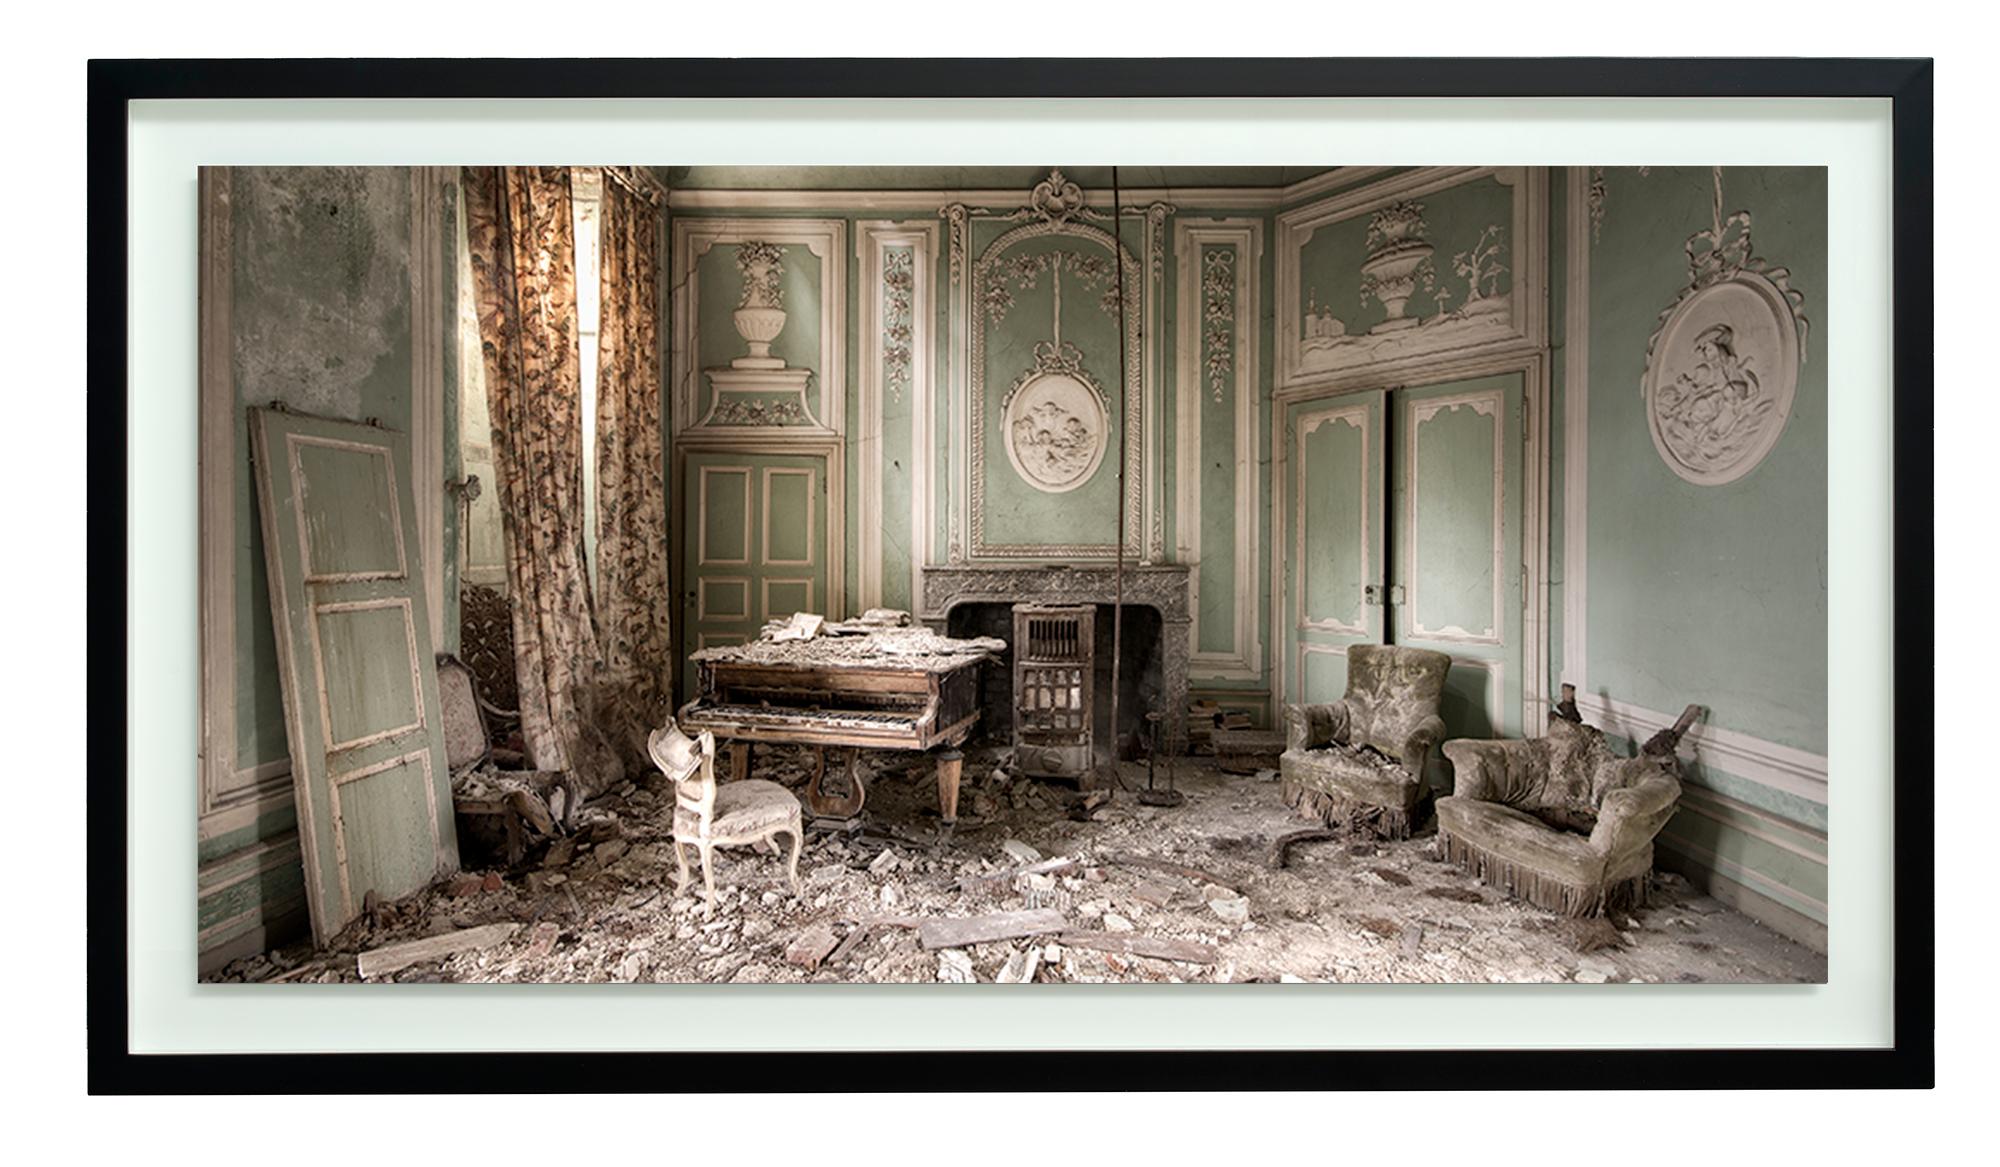 Tunes of Decay - Limited Edition of 5 pcs - Luxury framed with Museum Glass - Photograph by Daan Oude Elferink